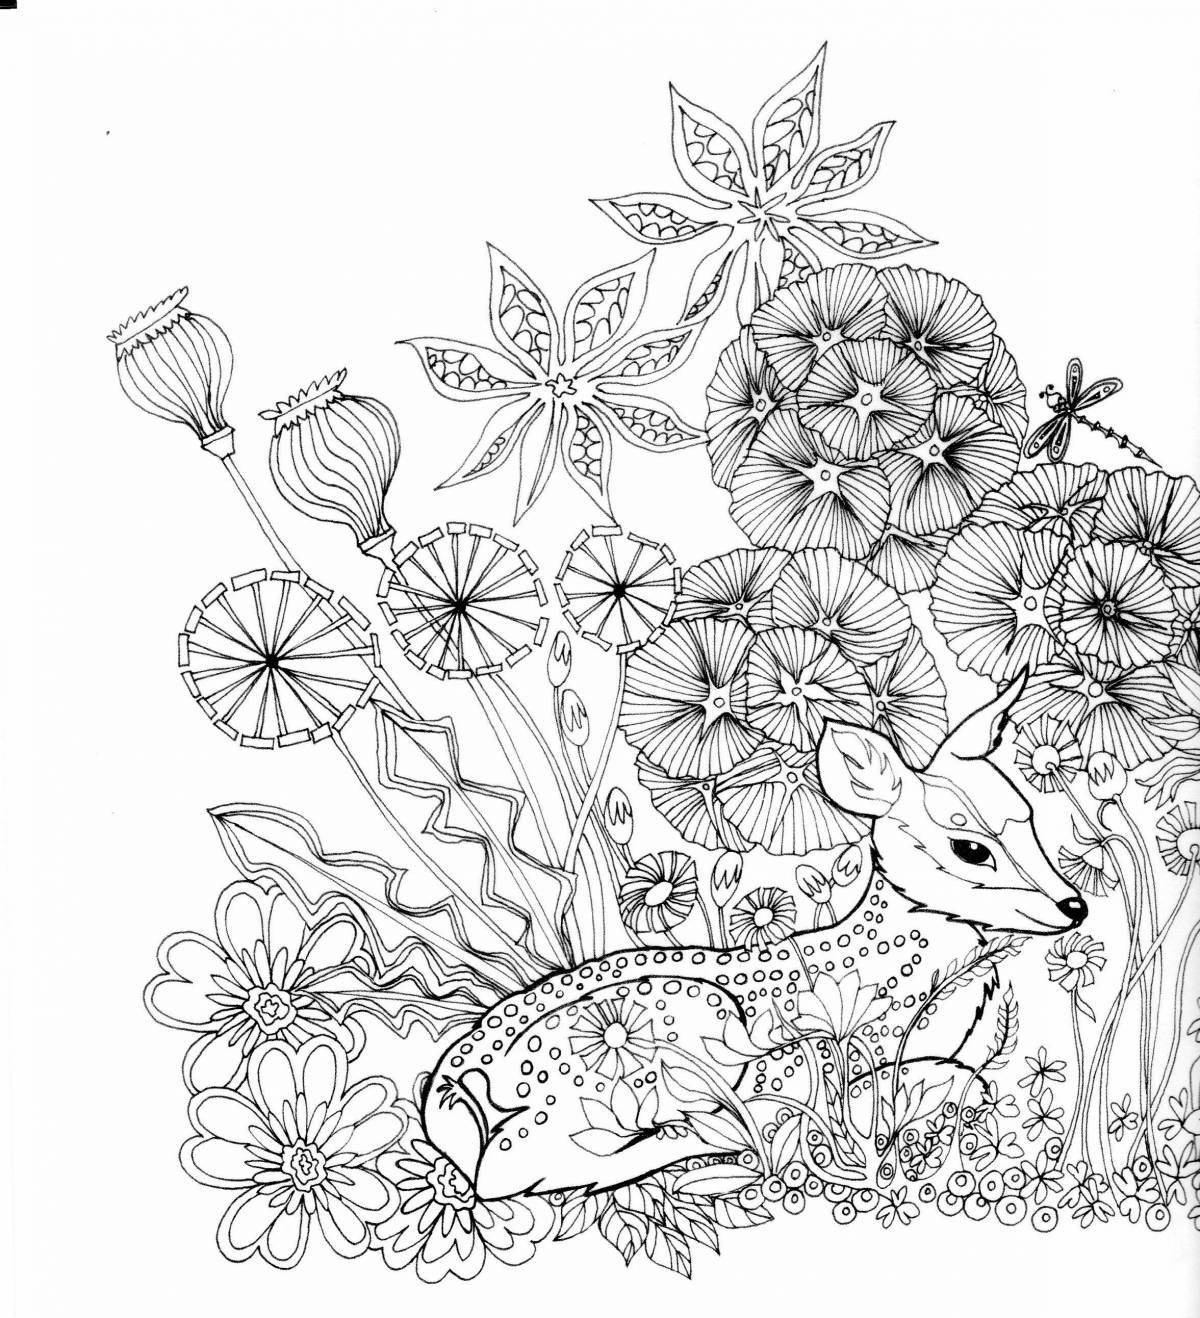 Inviting anti-stress forest coloring book